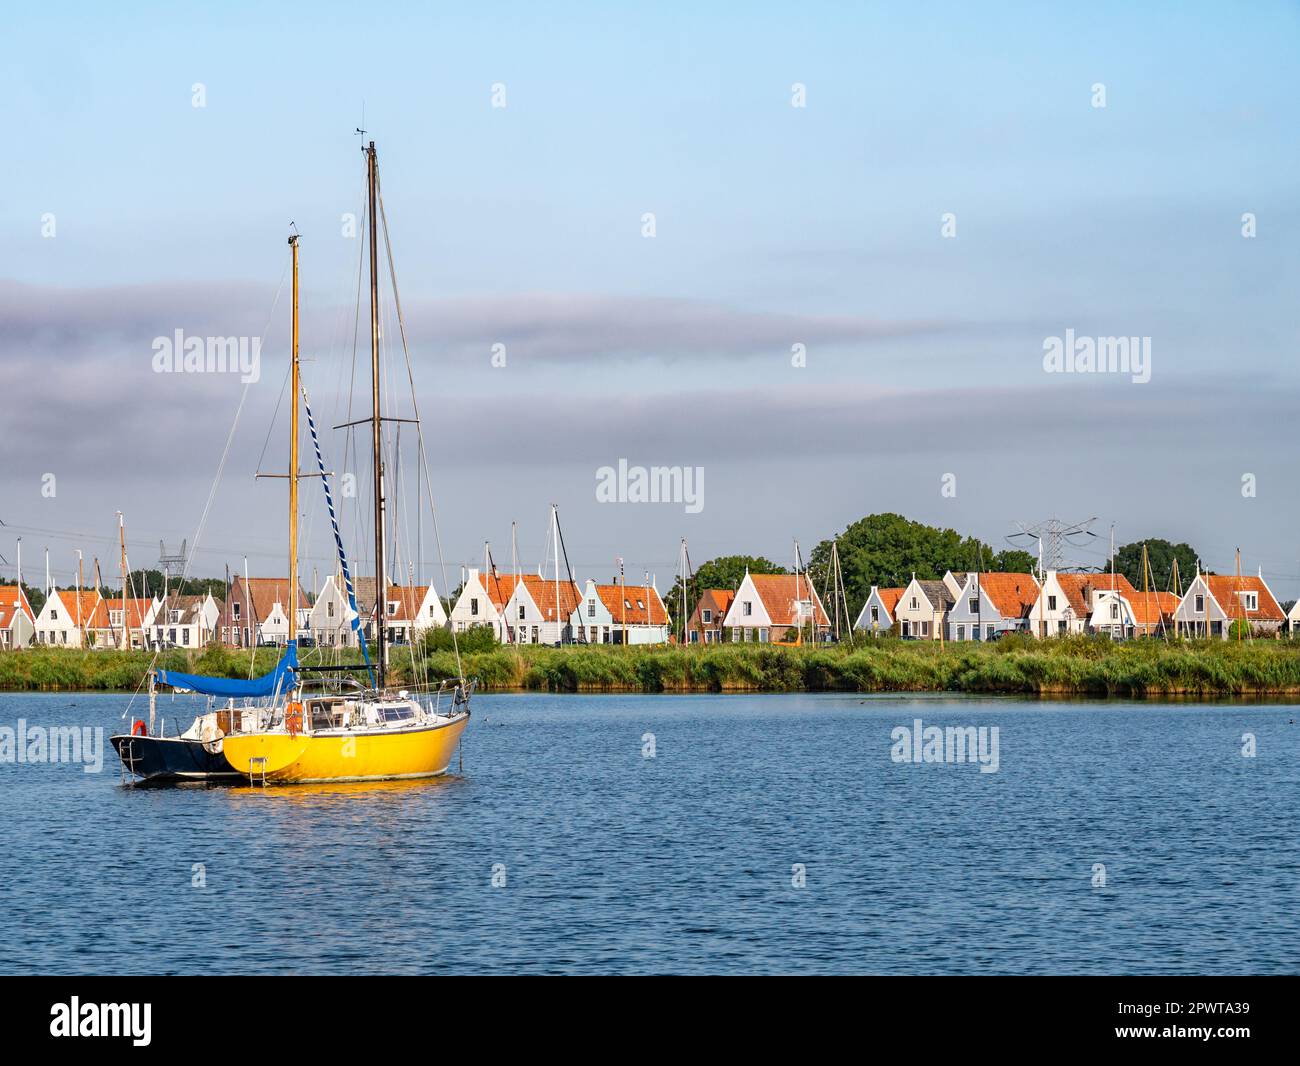 Skyline of row of houses and dike of Durgerdam village from Buiten IJ river near Amsterdam, Netherlands Stock Photo